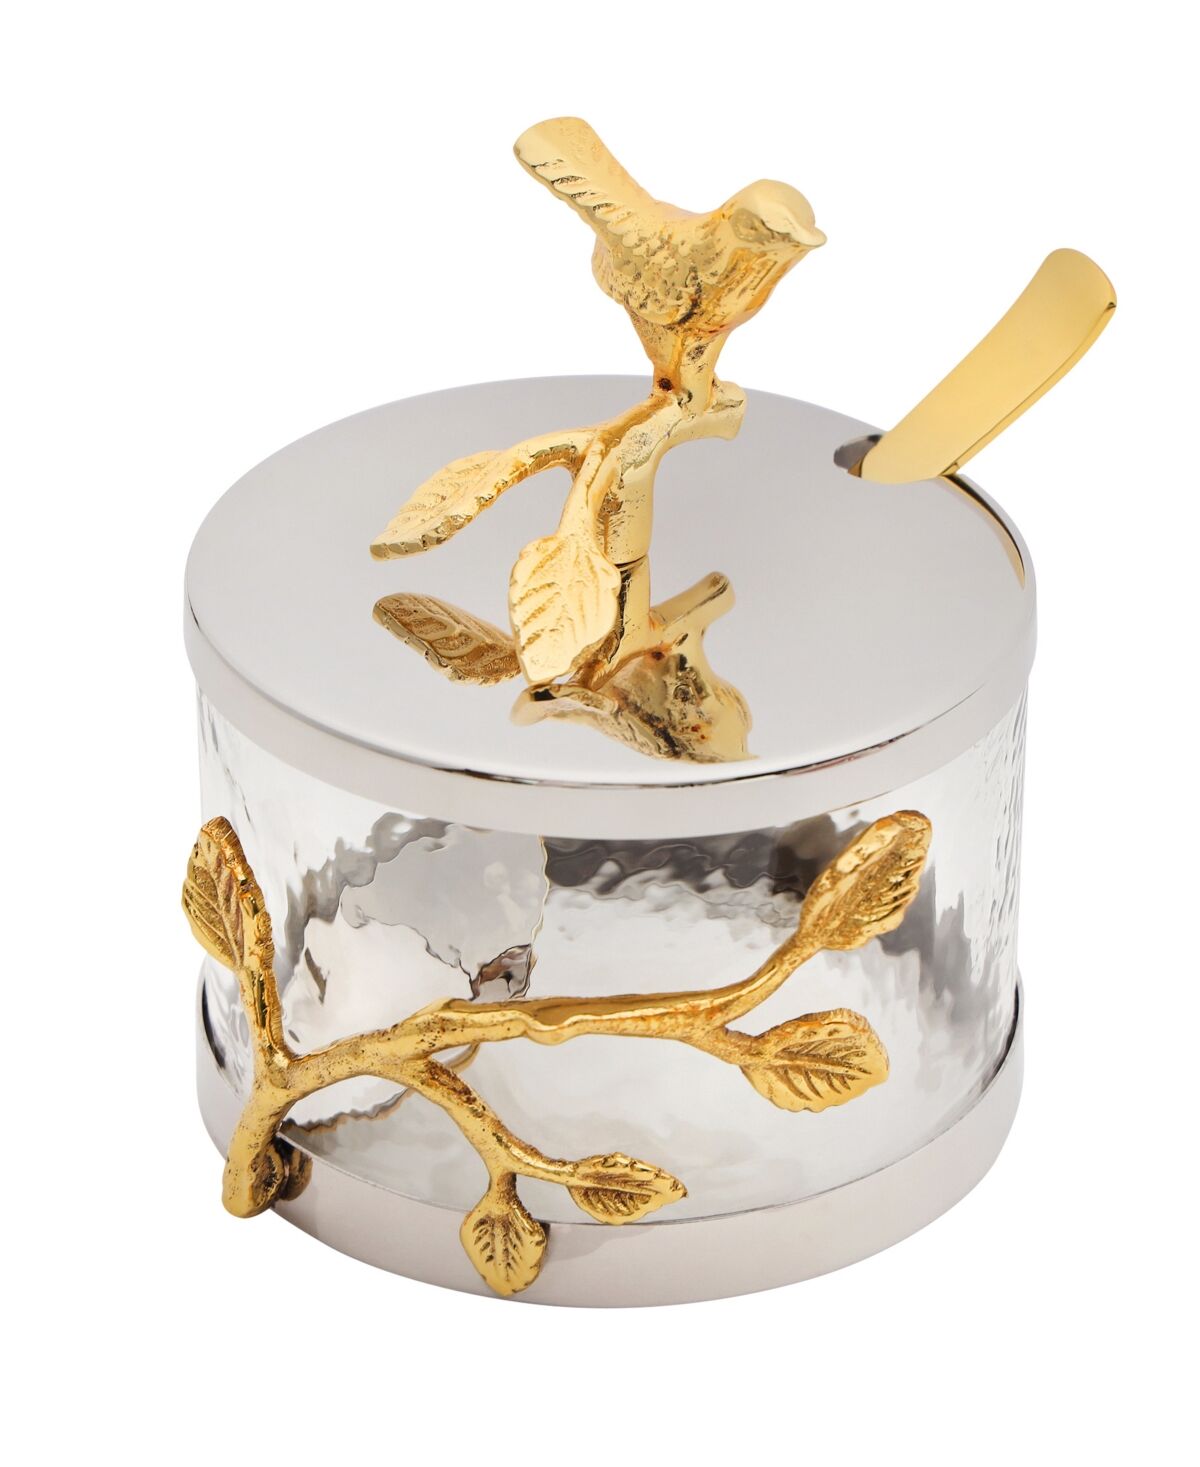 Godinger Signature Collection by Godinger Bird Glass Canister with Gold-Tone Accents Around Glass with Finial and Spoon, 23 oz - White